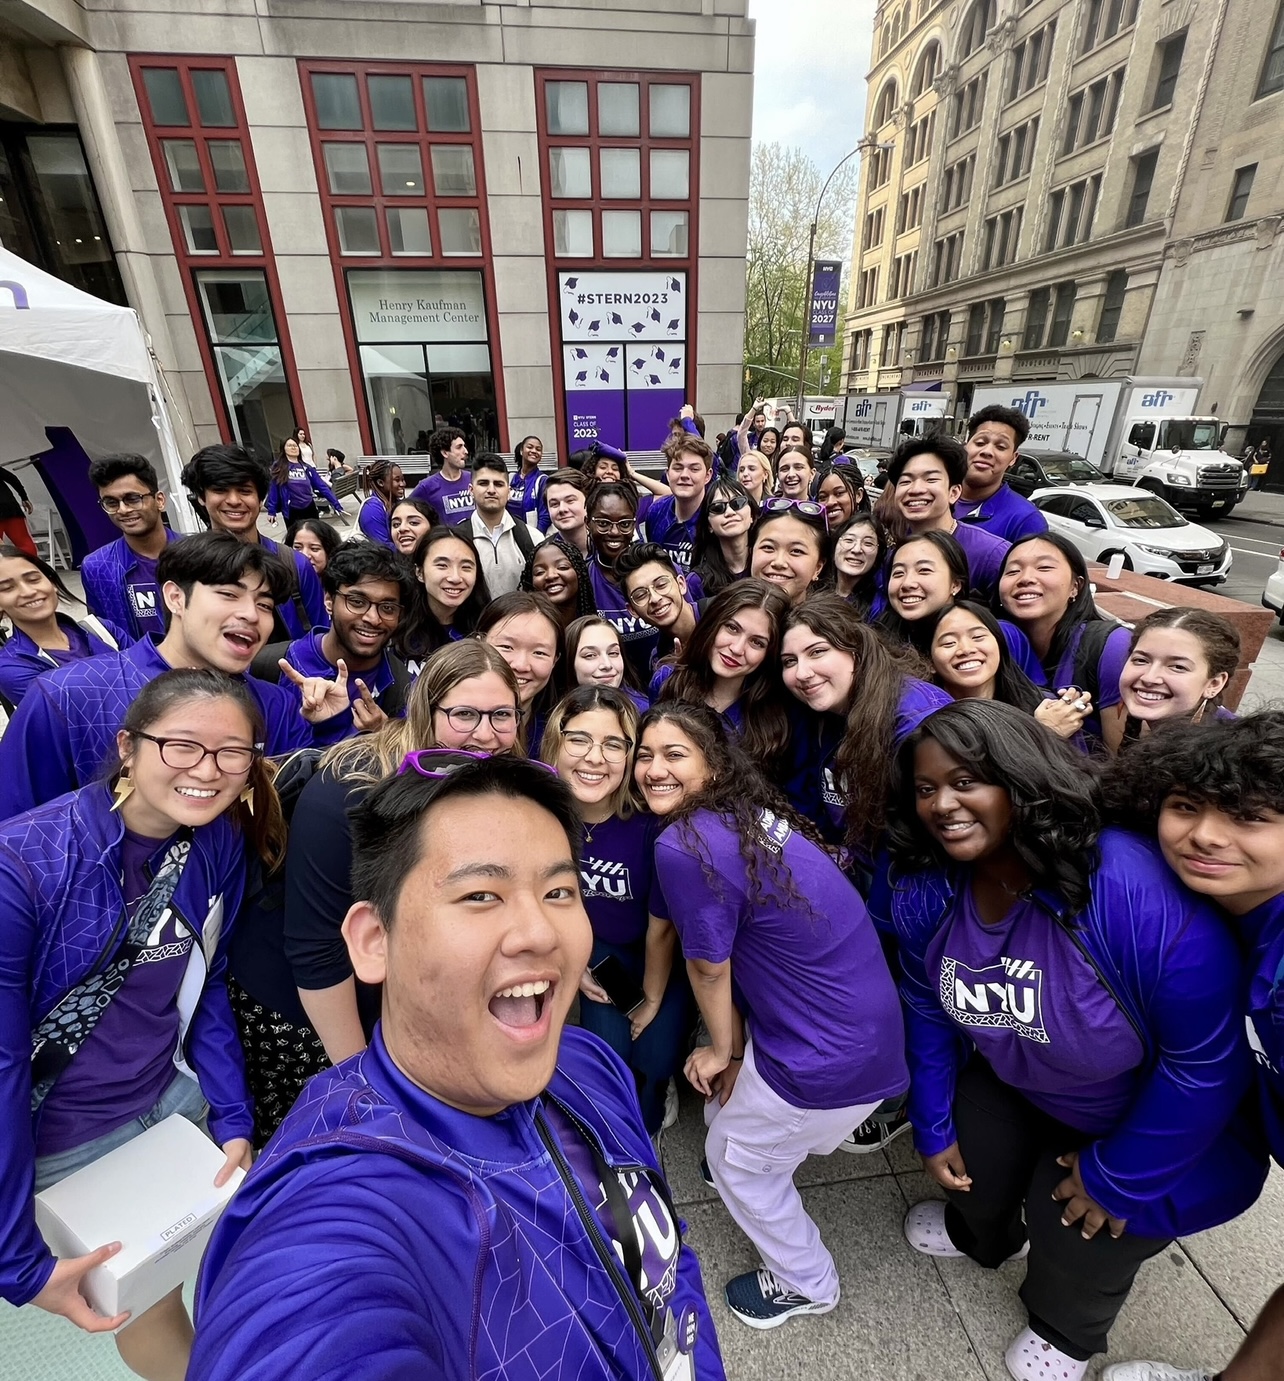 Dozens of purple-jacketed student Admissions Ambassadors pose for selfie.